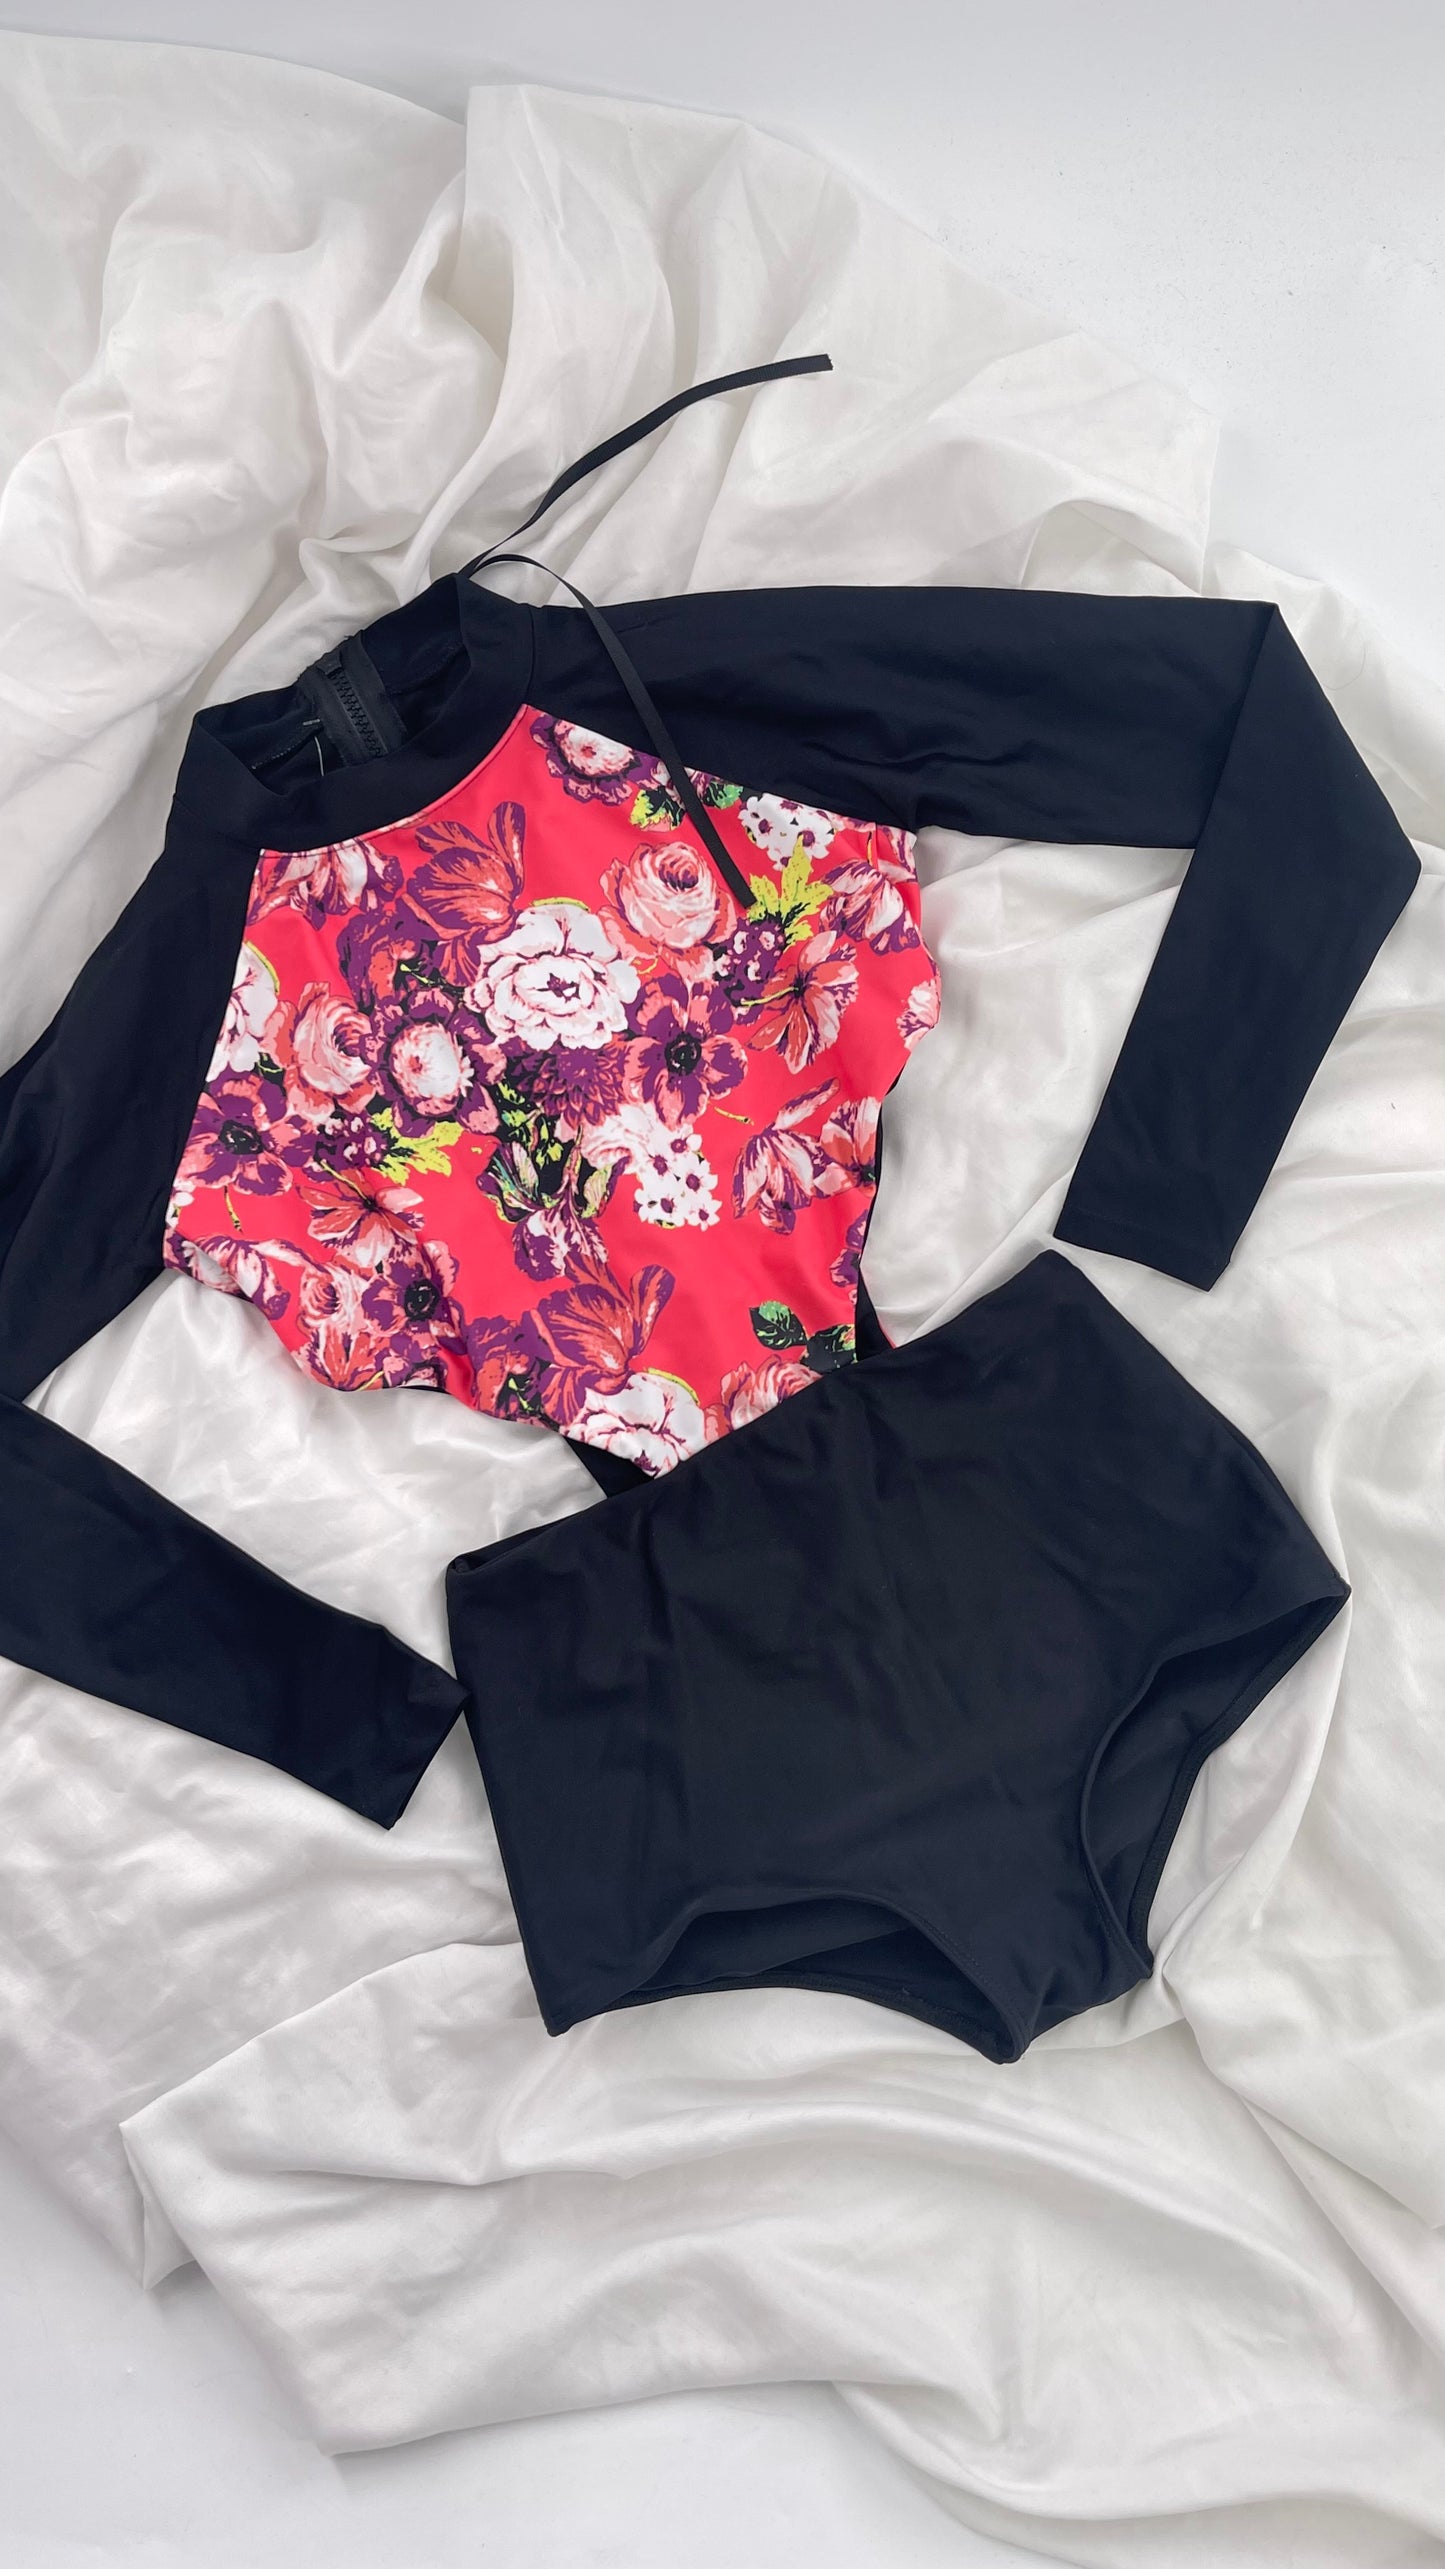 BEACH RIOT x Free People Black Long Sleeve Swimsuit with Hot Pink Floral Torso and Cut Outs (XS)